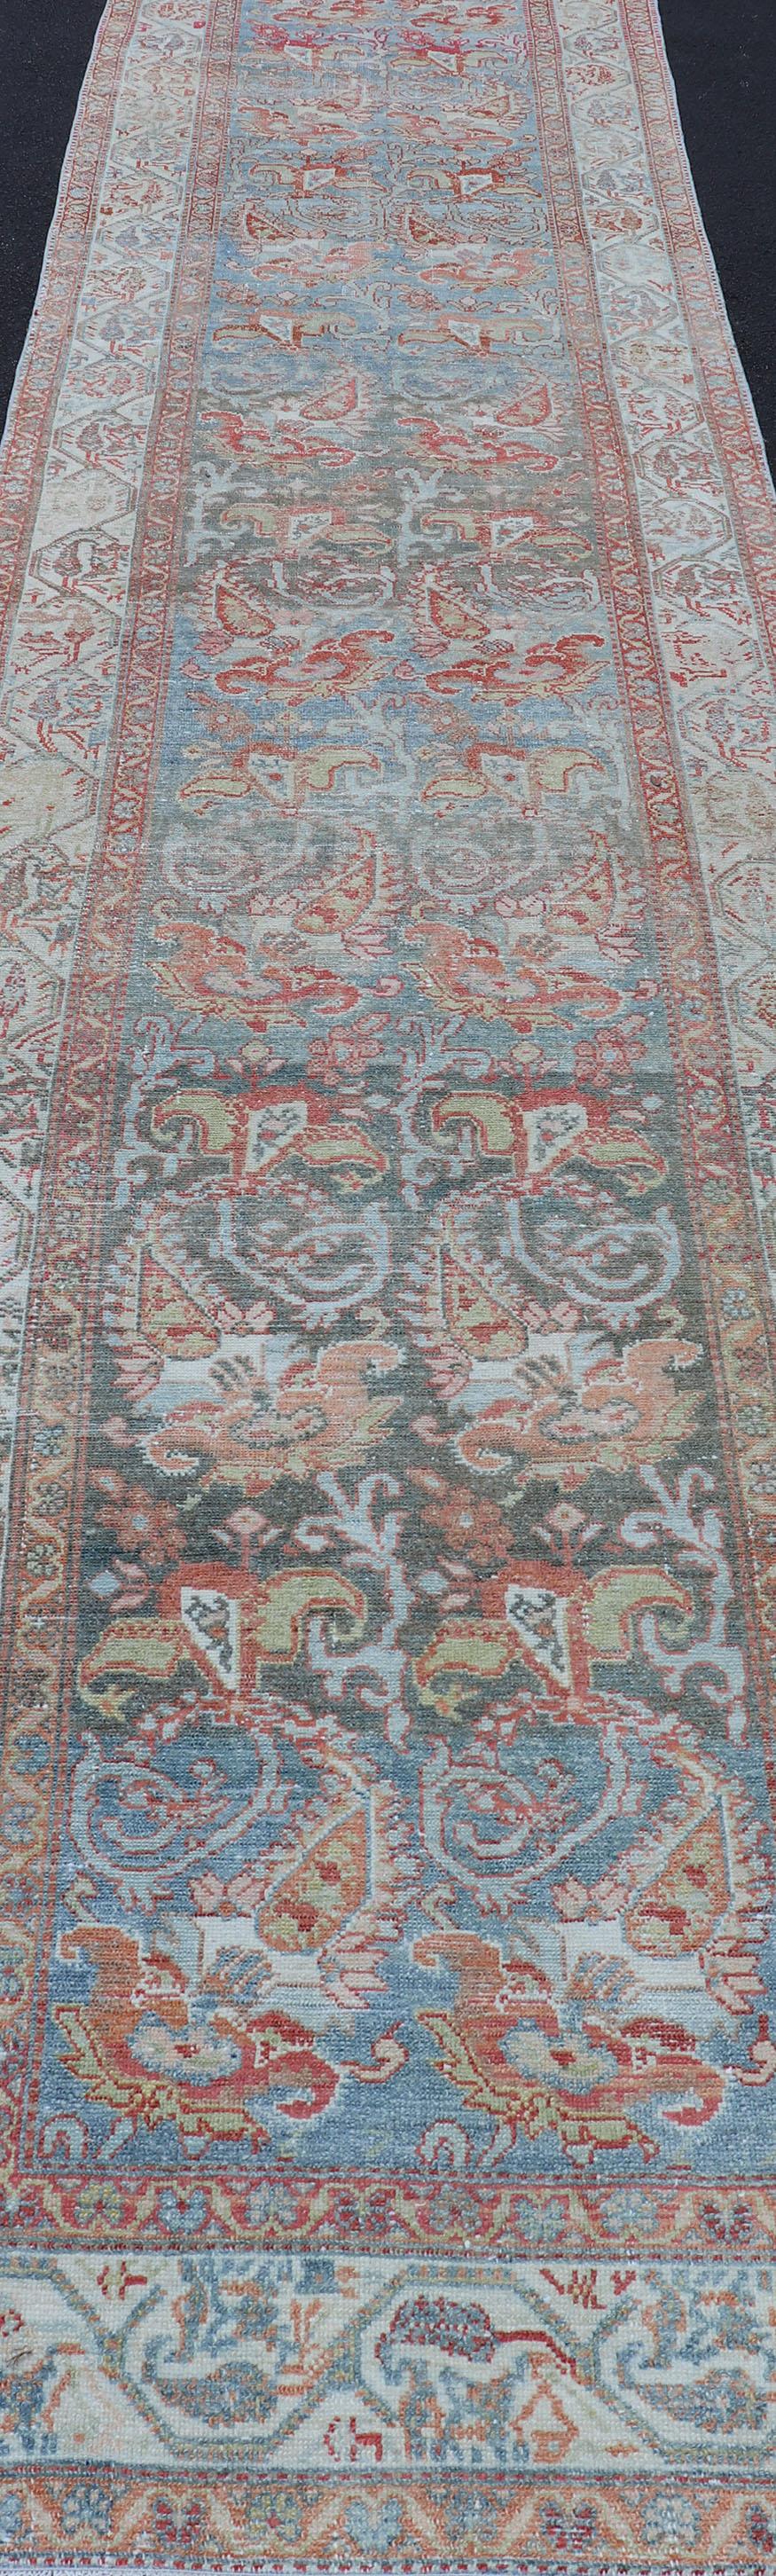 Wool Fine Antique Persian Malayer Runner in Soft Tones of Blue, Red, Brown and Cream For Sale